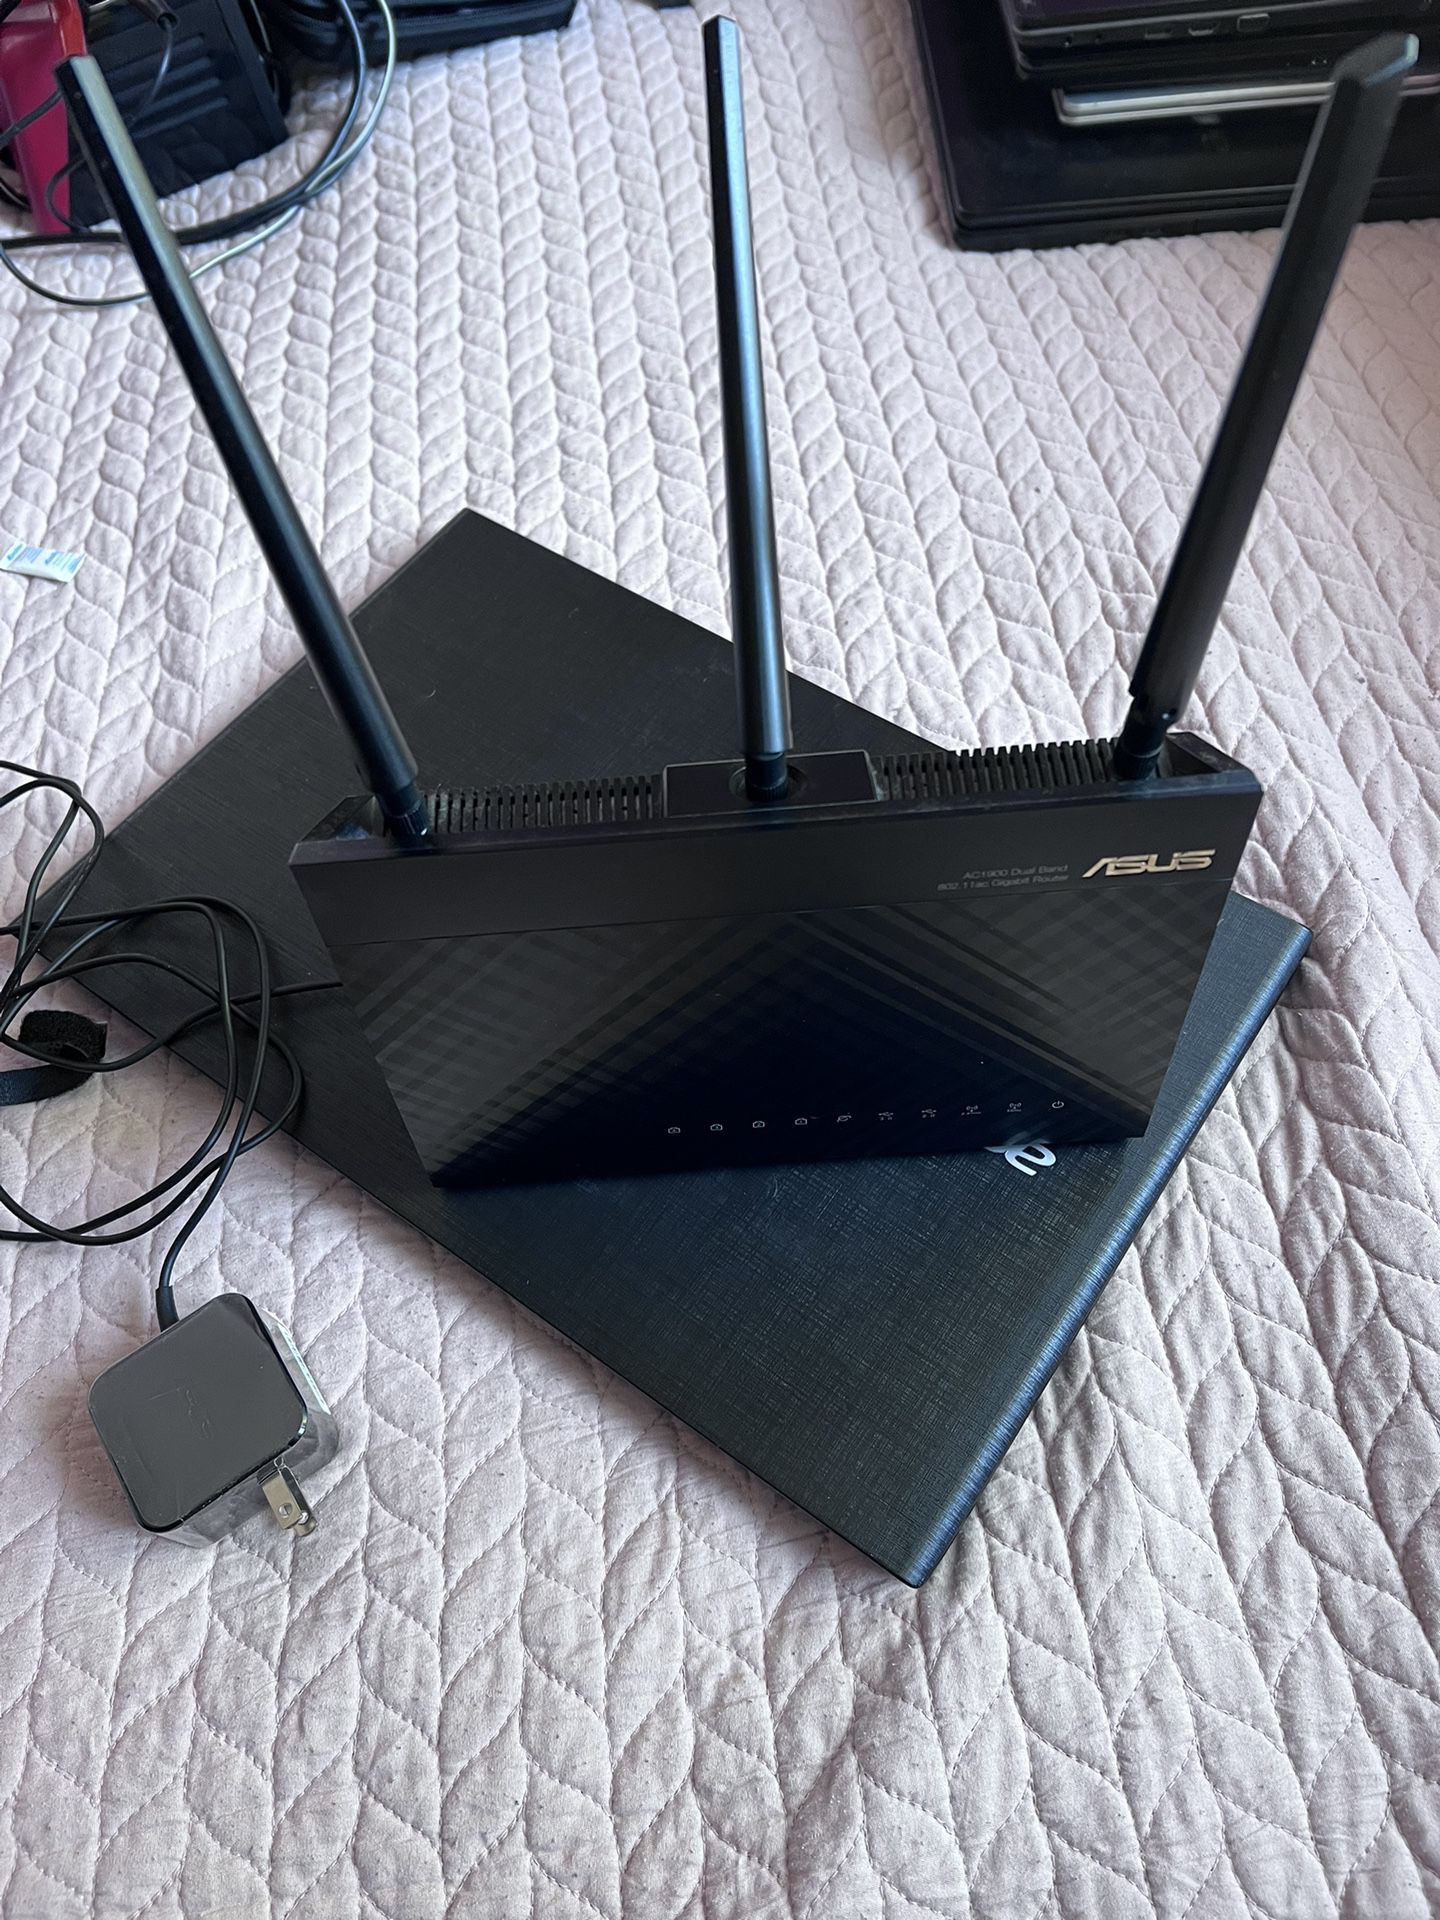 Asus Router. AC1900